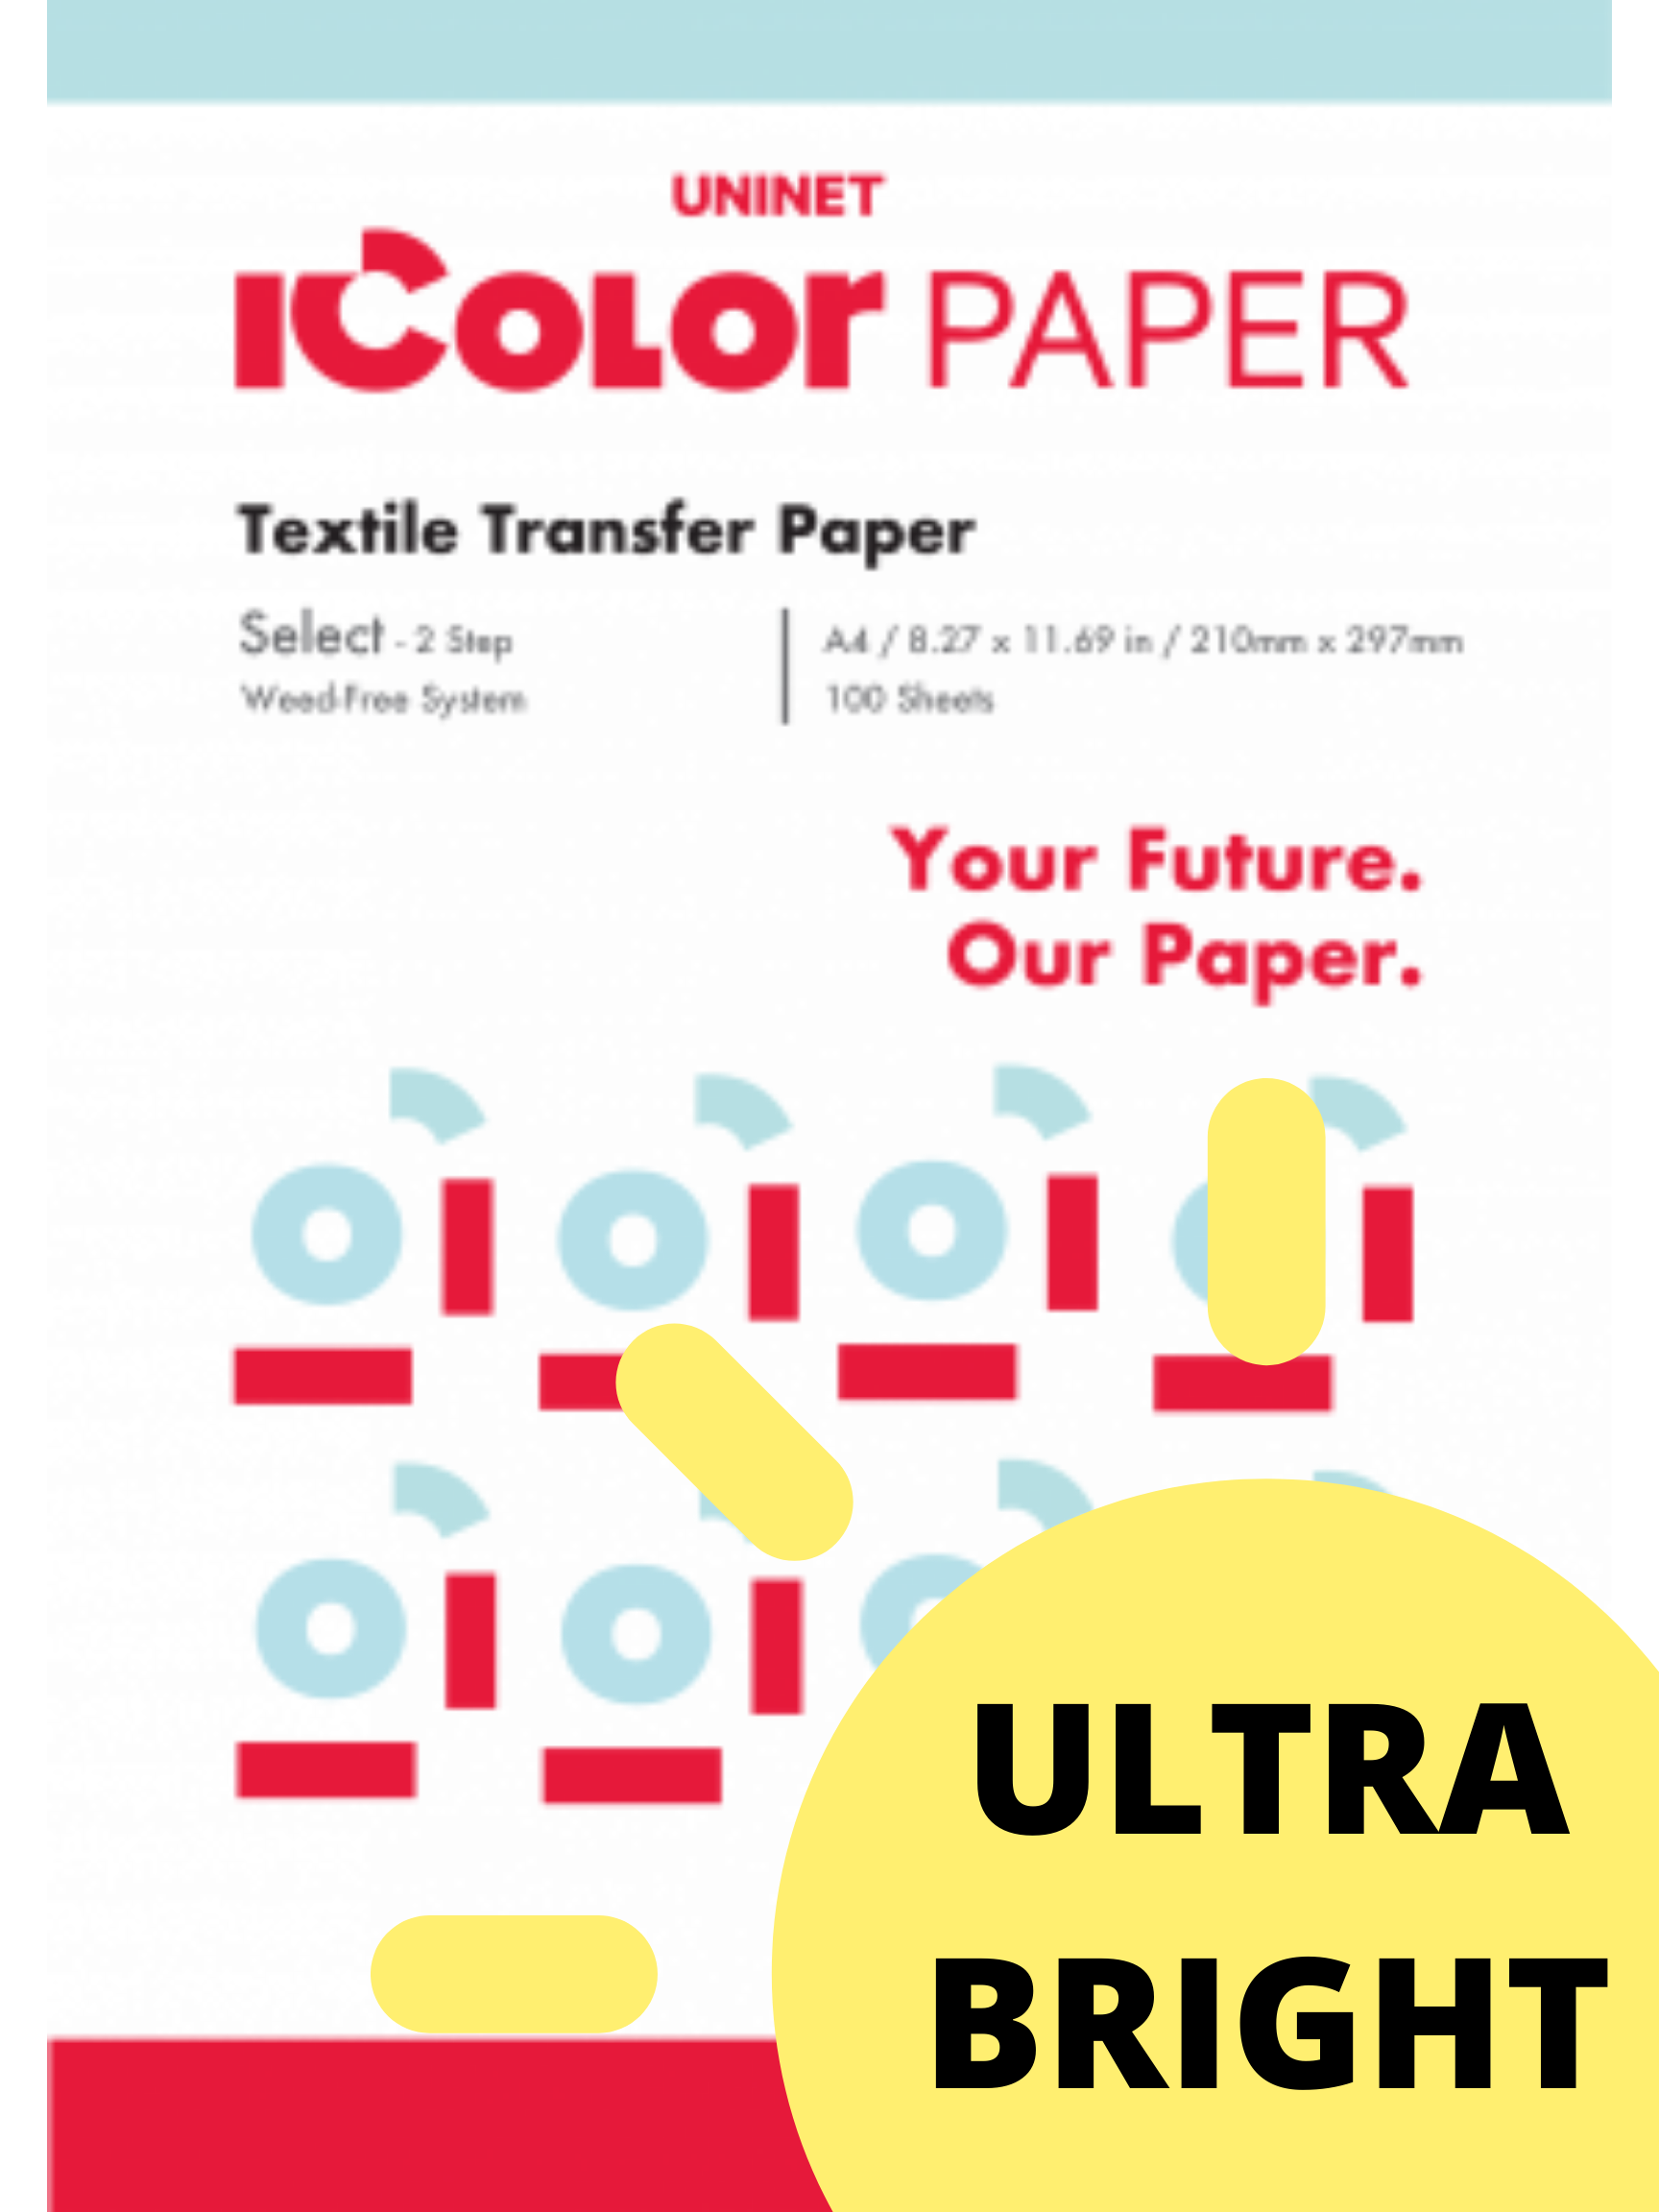 IColor Select Ultra Bright 2 Step Transfer & Adhesive Paper Kit For Light and Dark Textiles -XL- 8.27 in x 17 in (210 x 432mm)